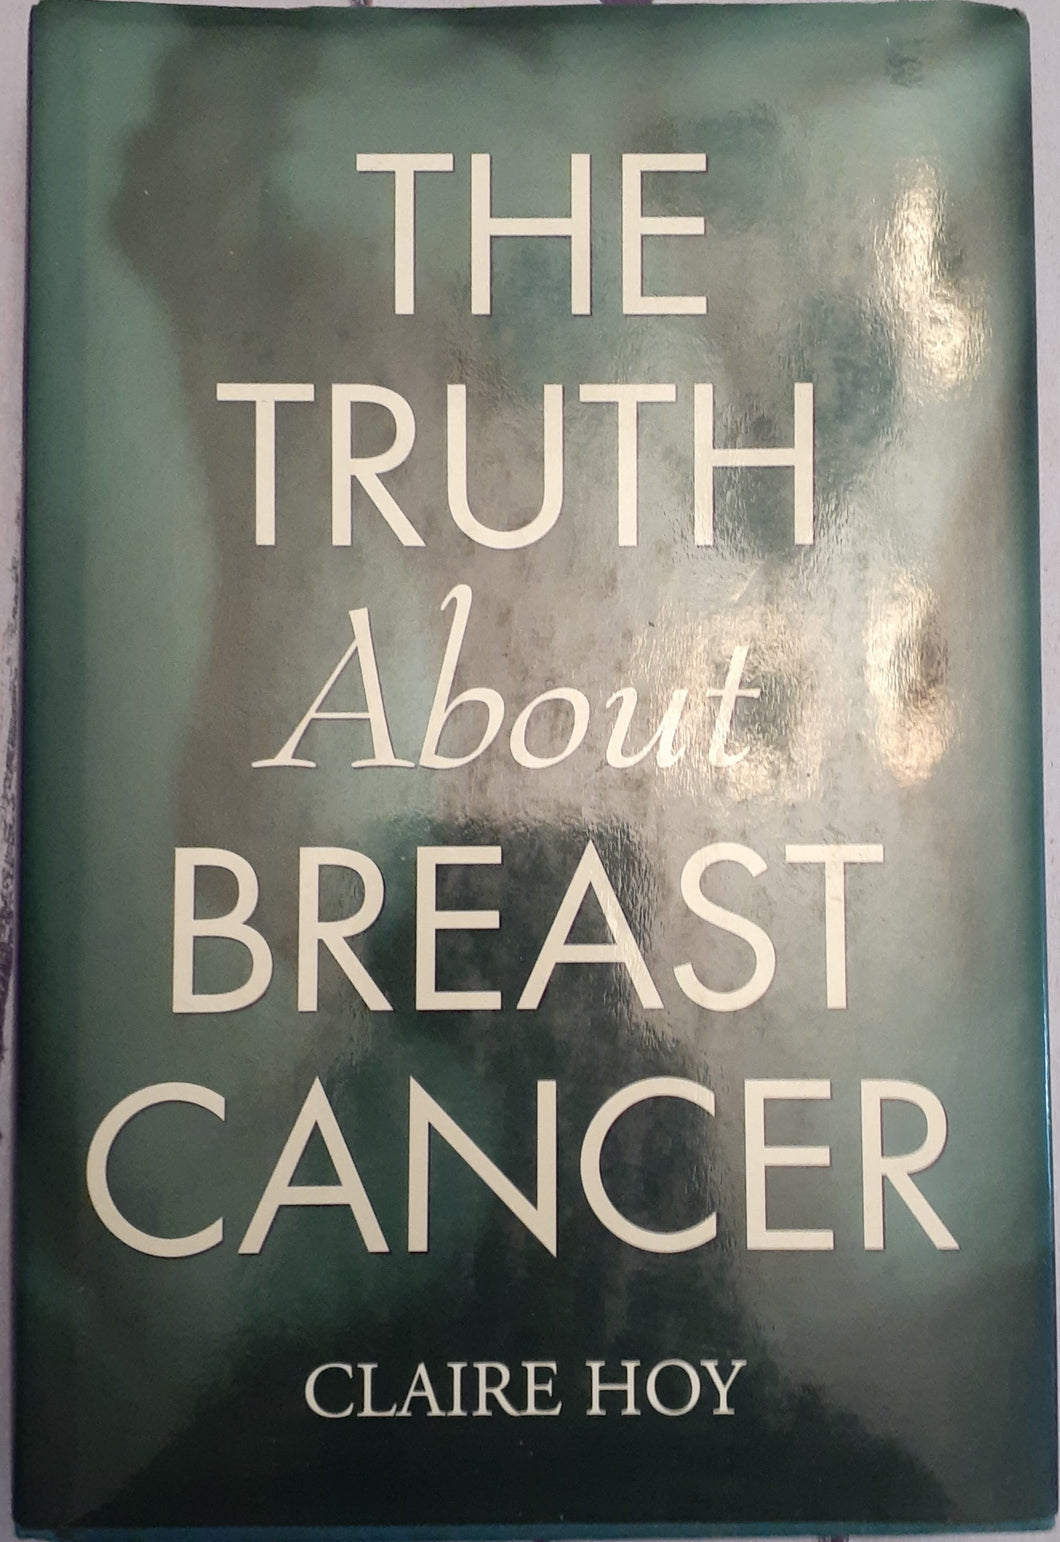 The Truth about Breast Cancer